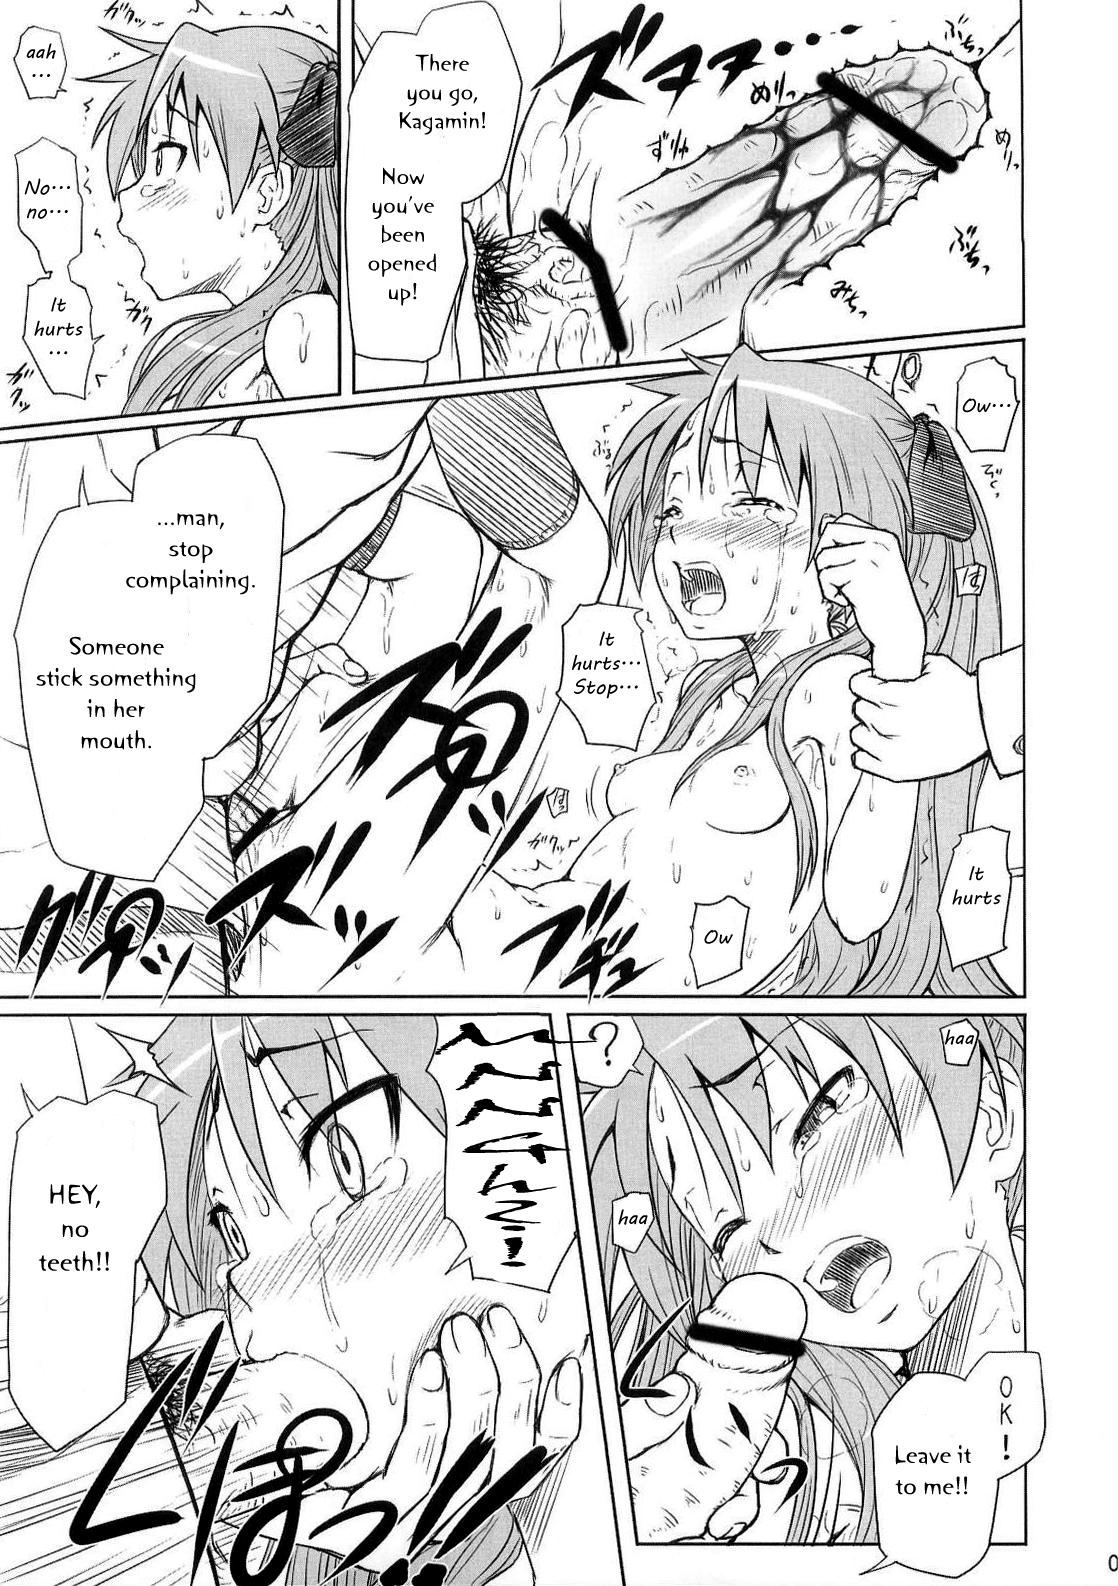 Blackmail Kagamin wa Ore no Yome | Kagamin Is My Woman - Lucky star Jerk - Page 8